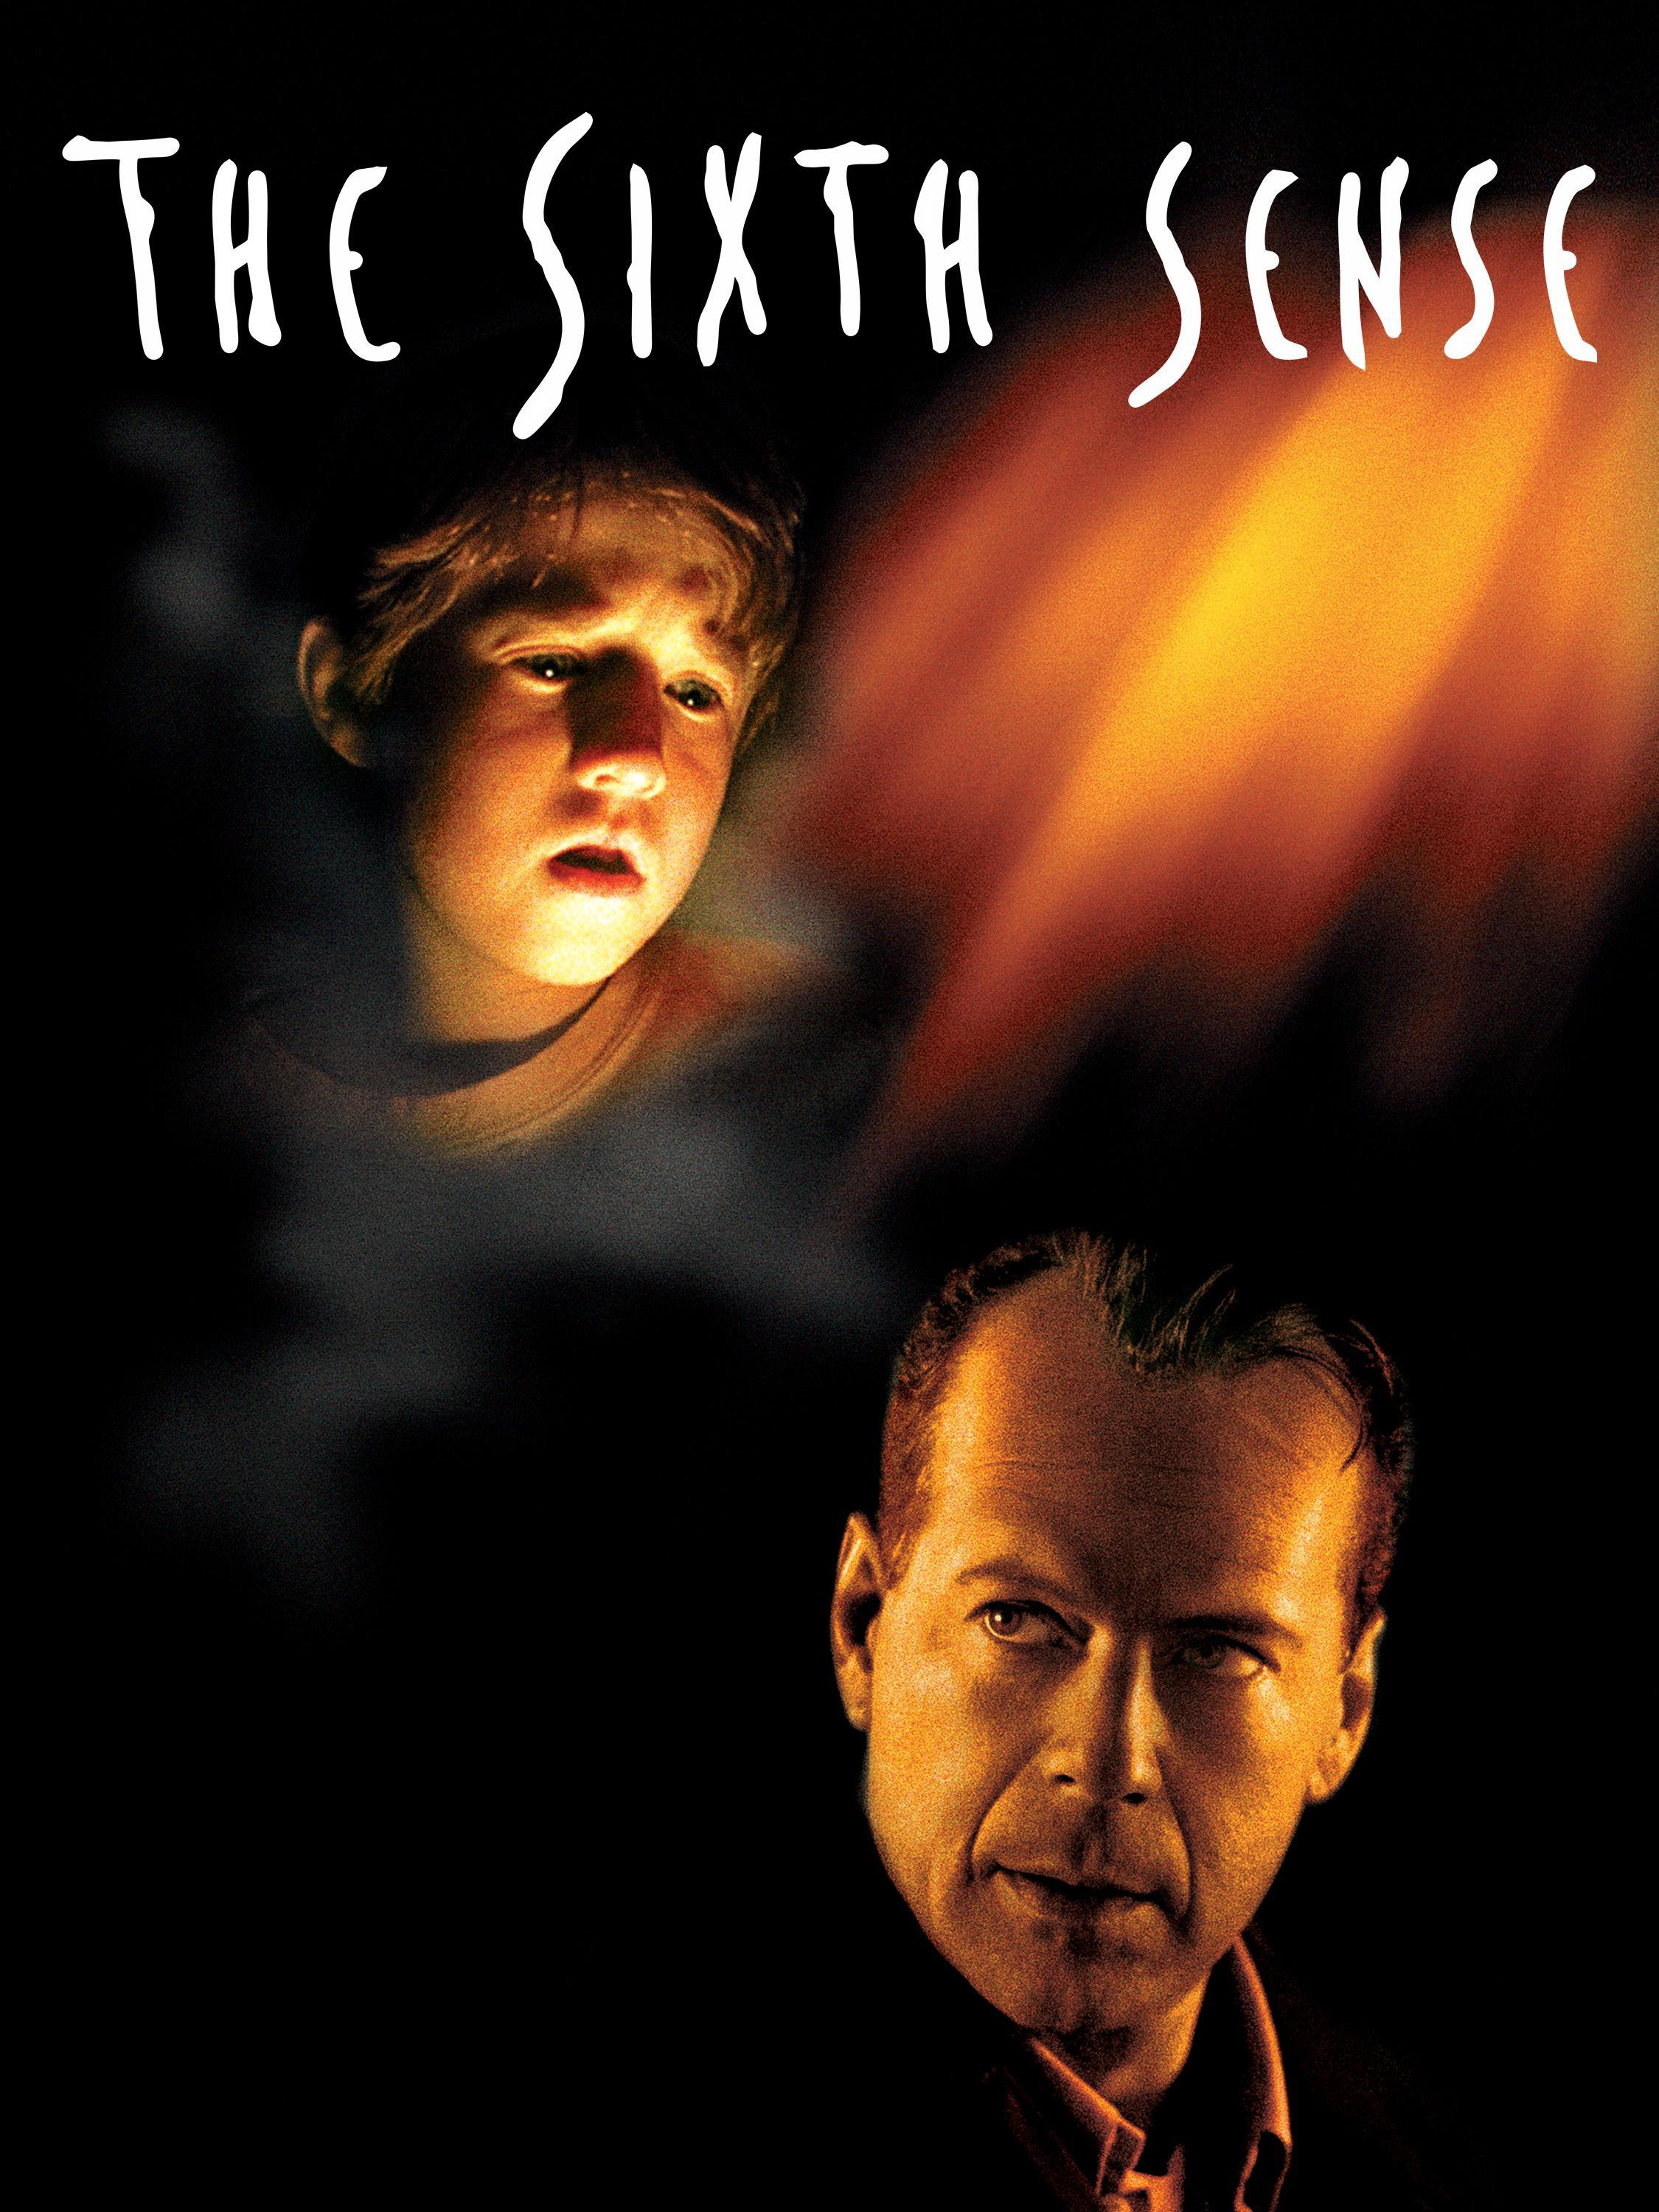 Cover of the DVD The Sixth Sense